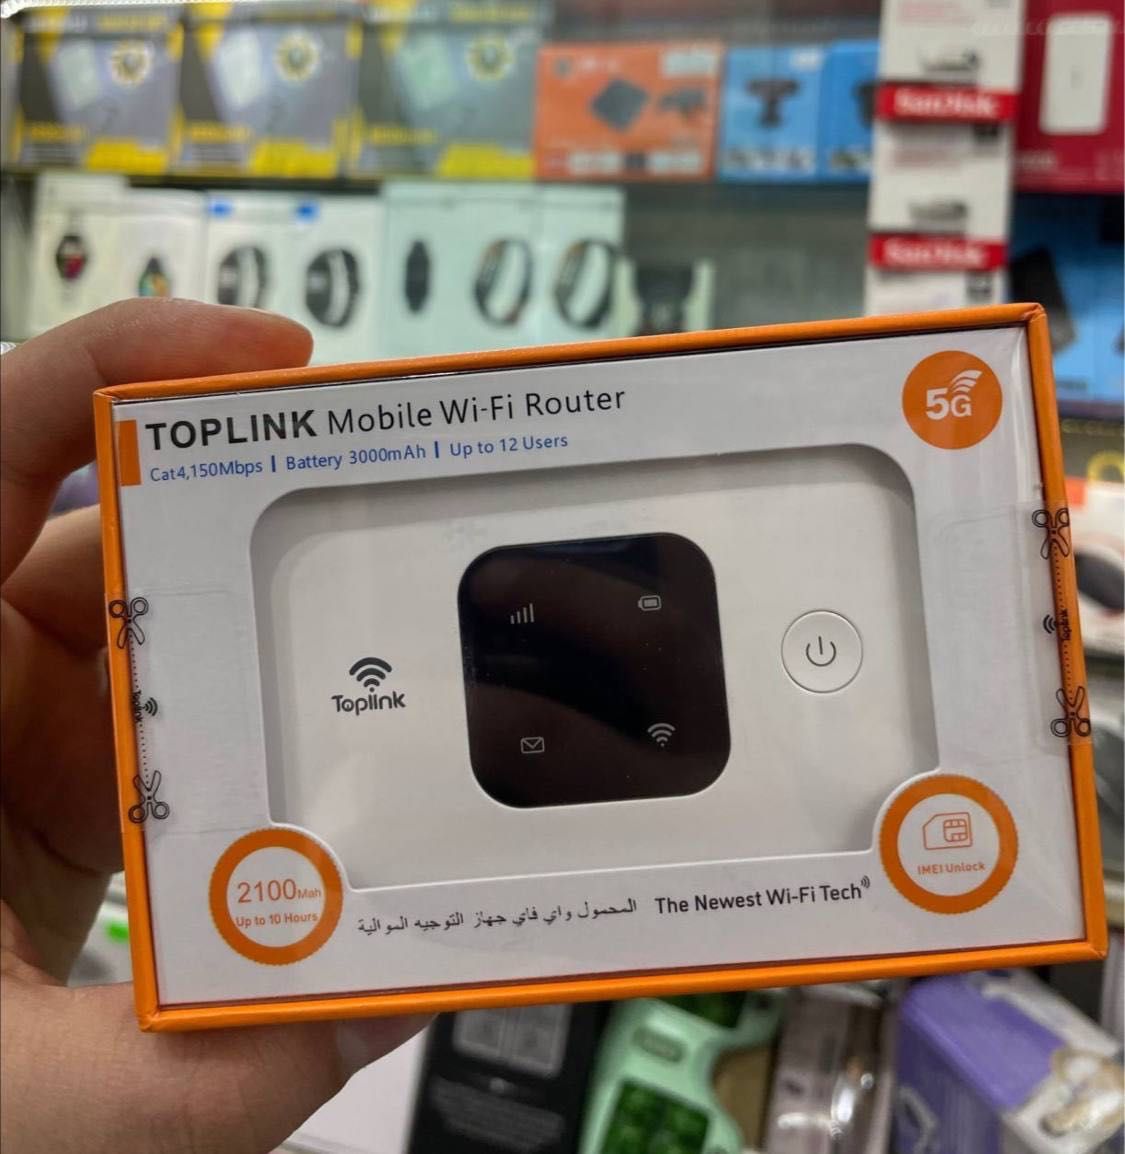 Toplink mobile wifi router 5G